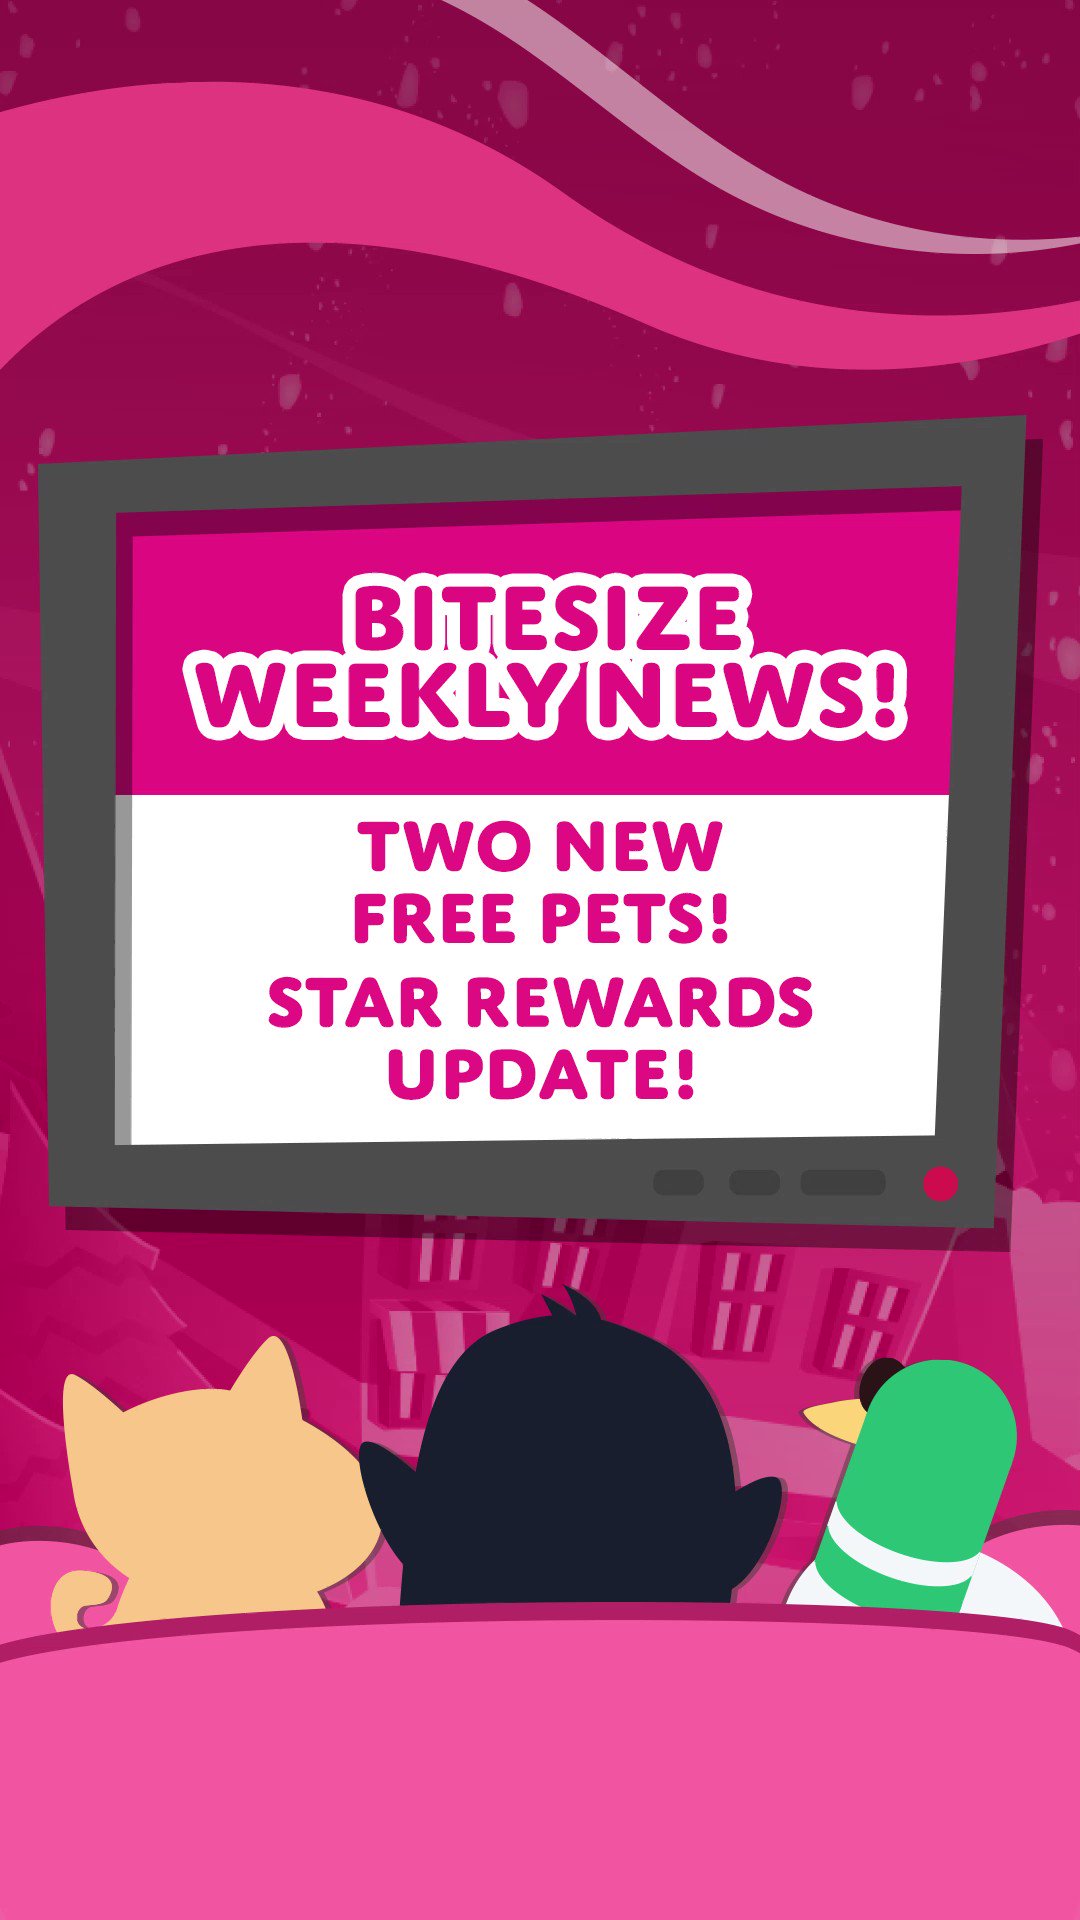 Adopt Me! on X: ⭐️ Star Rewards Update!⭐️ 🗓️ NEW Star Rewards system -  get stars for logging in, and collect new unique pets and toys from the  calendar! 🐈 ✨ Get